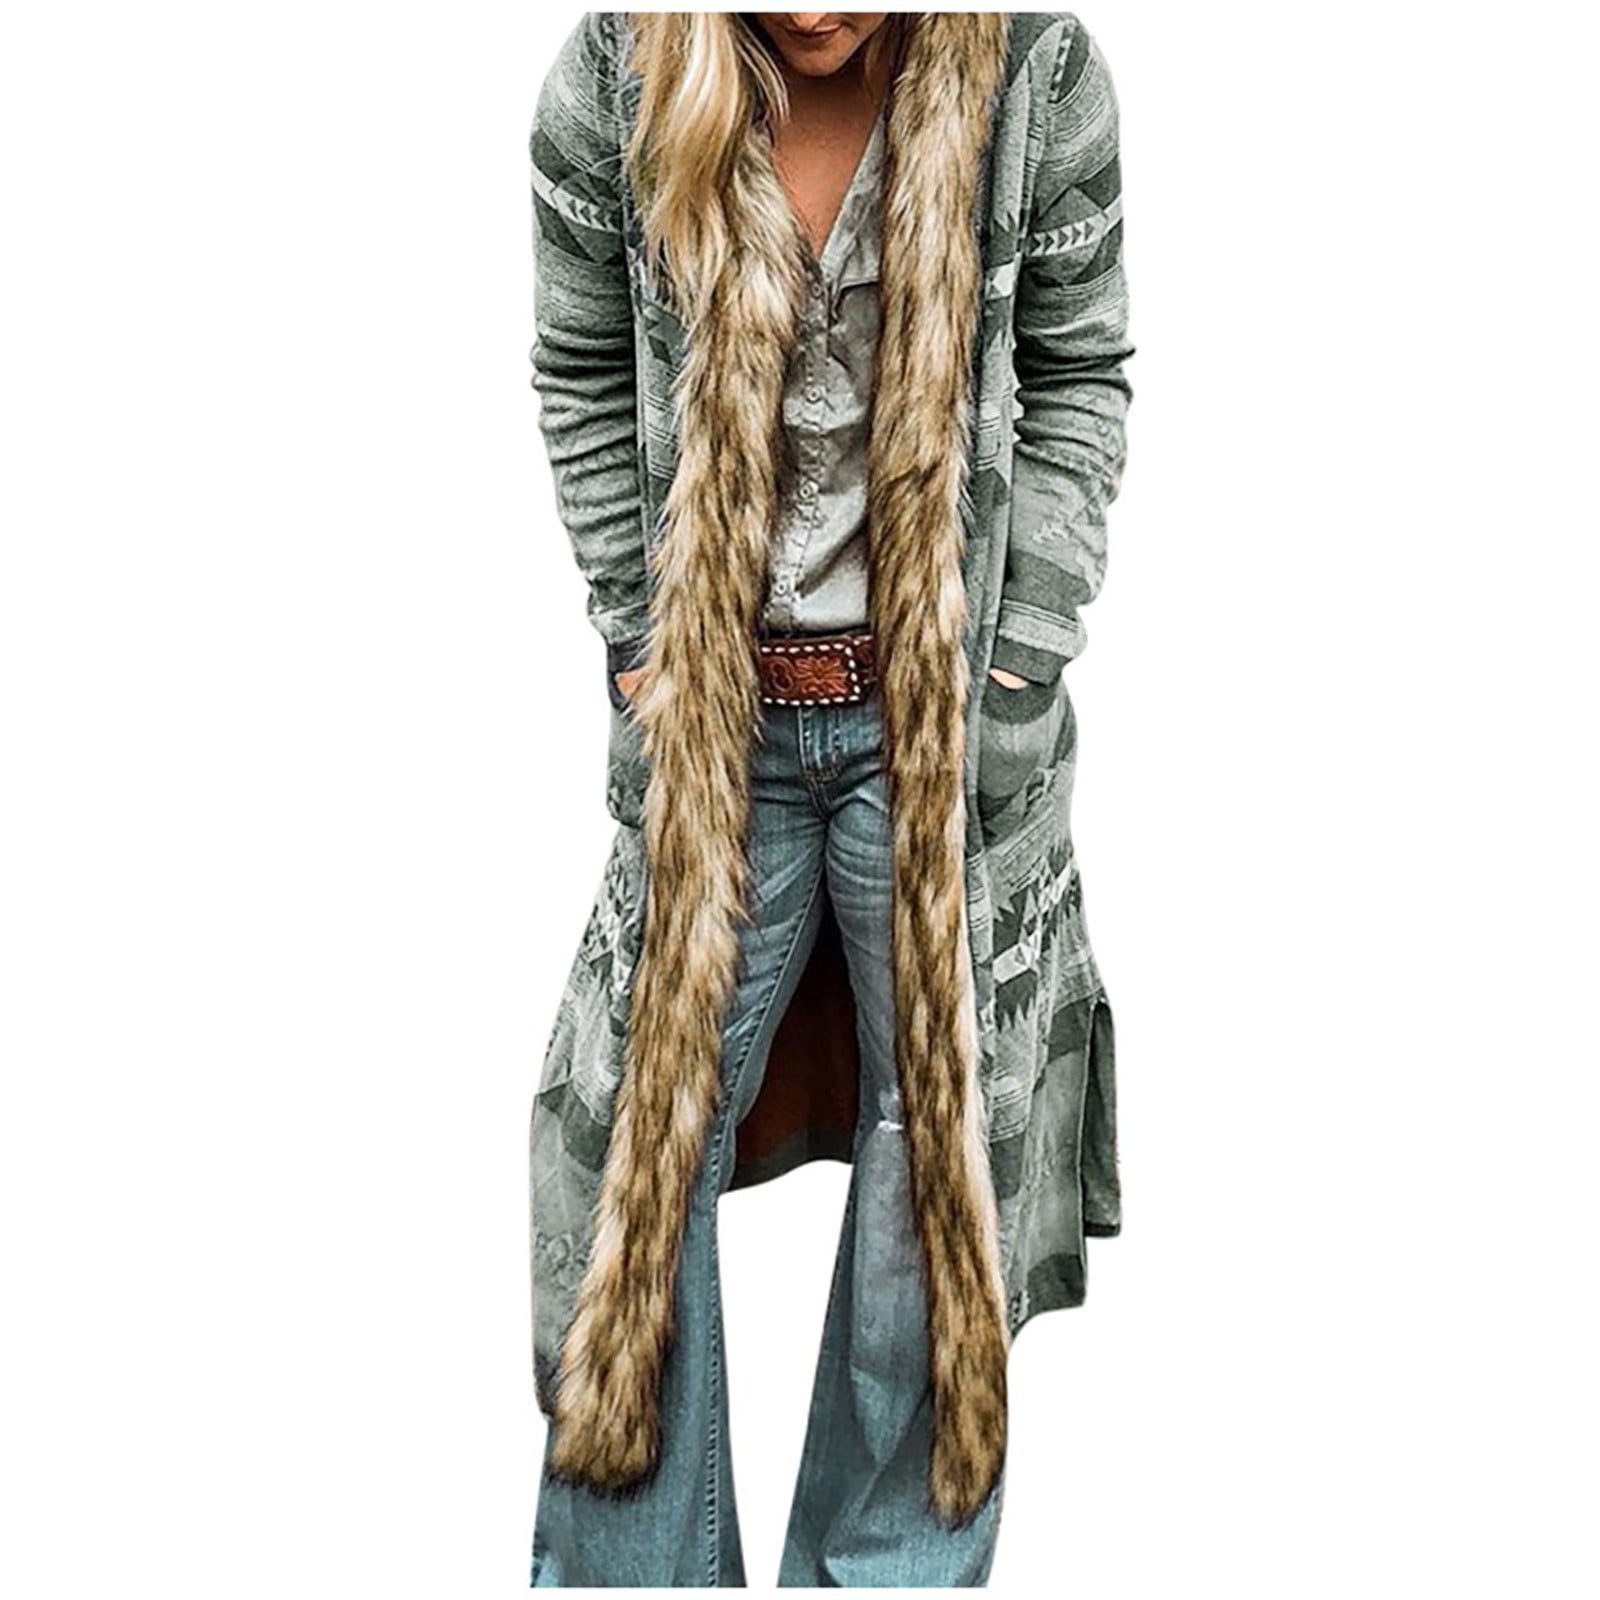 Trench Coats for Women Casual Winter Long Cardigans Hooded Vintage Ethnic Style Southwestern Jackets Pocket Hoodie 